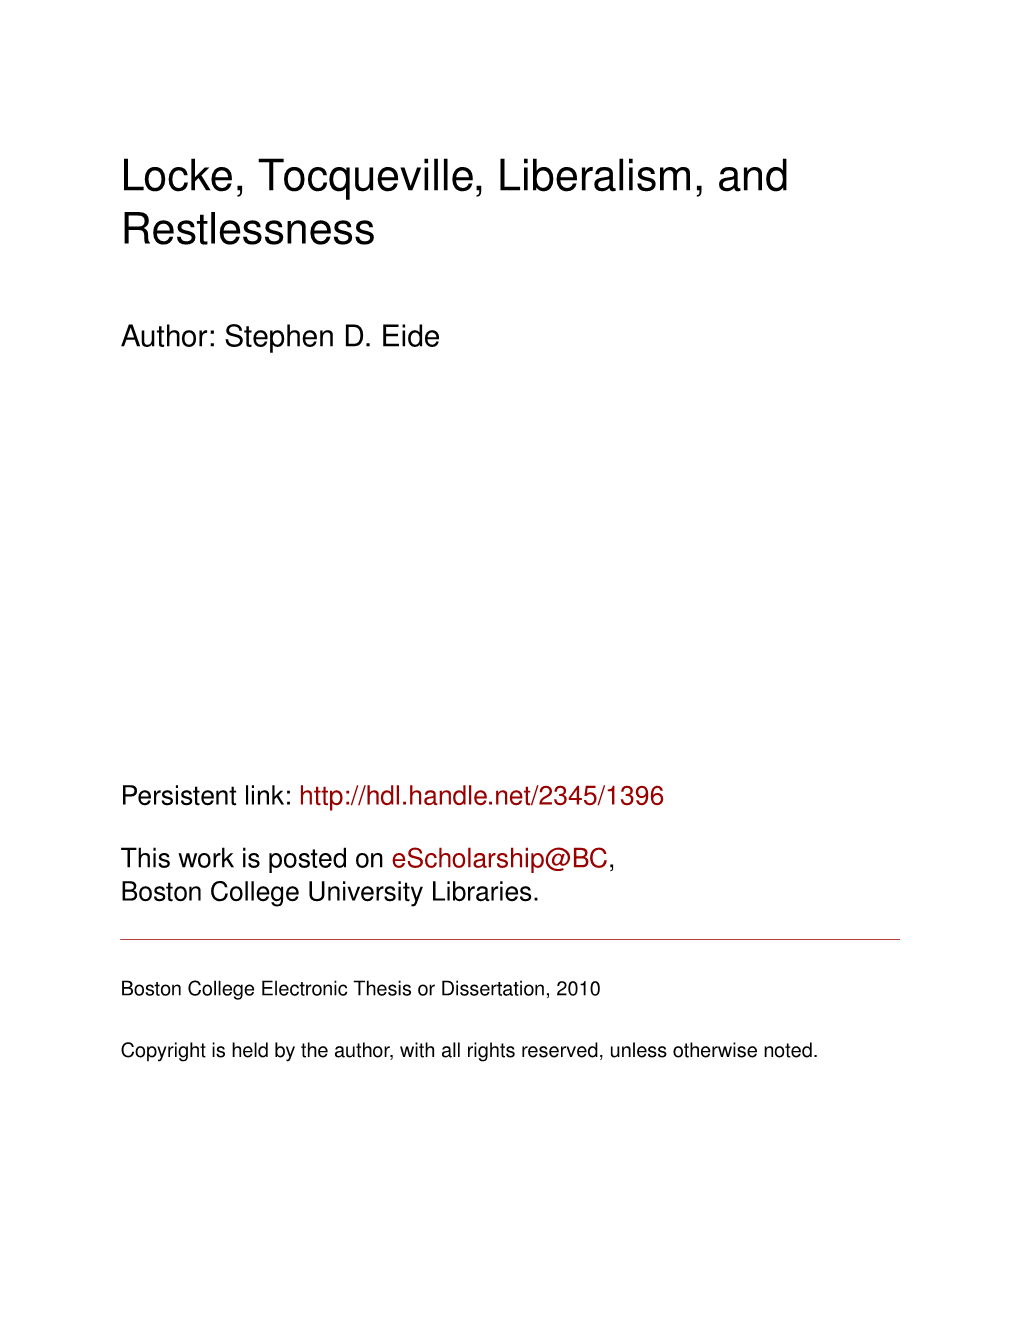 Locke, Tocqueville, Liberalism, and Restlessness